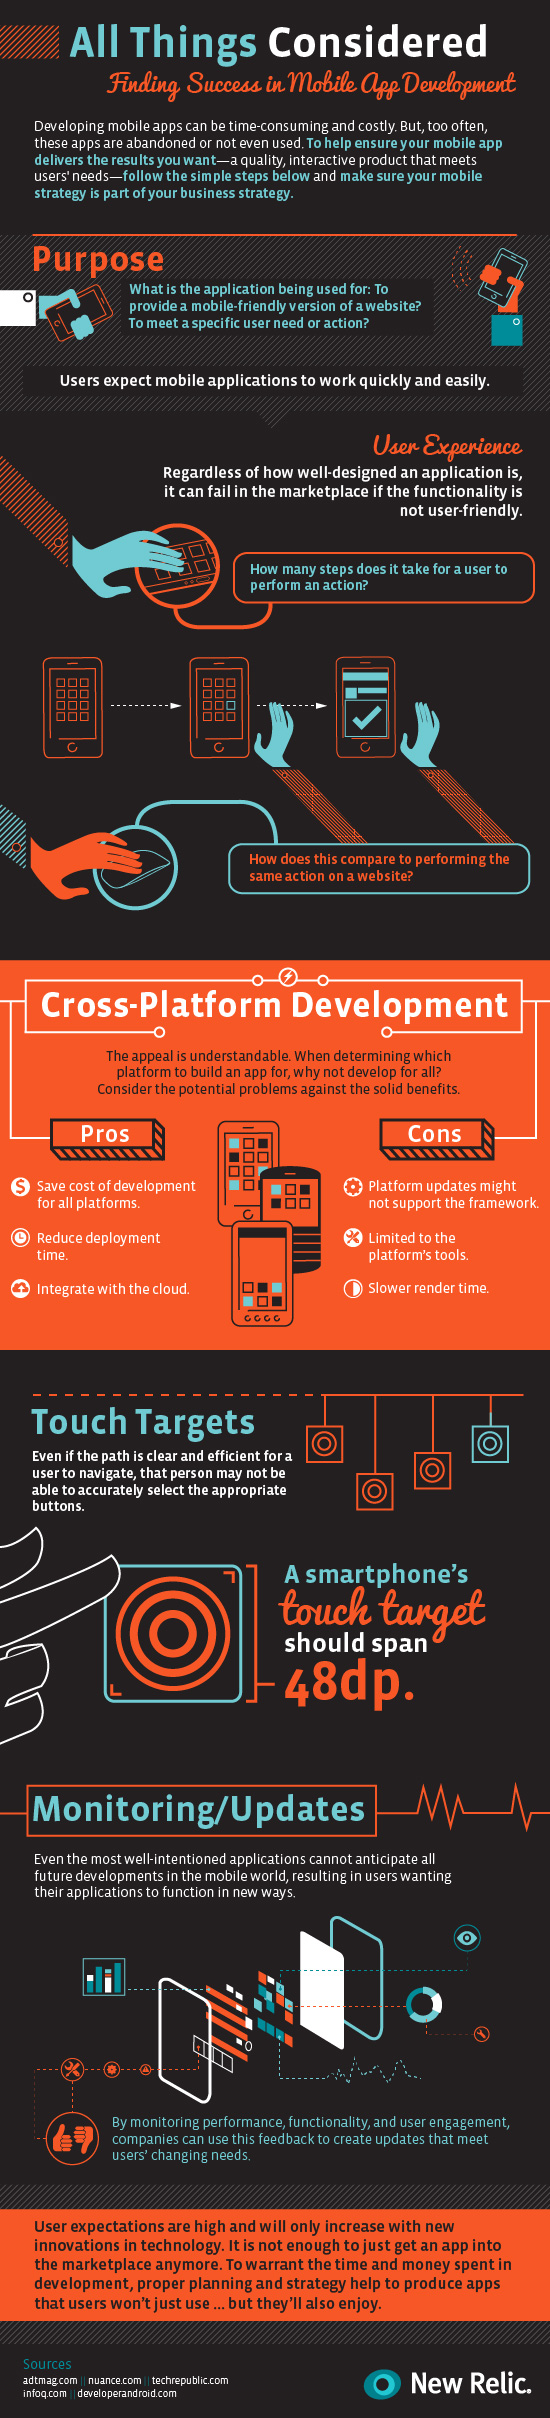 Finding Success in Mobile App Development [Infographic]